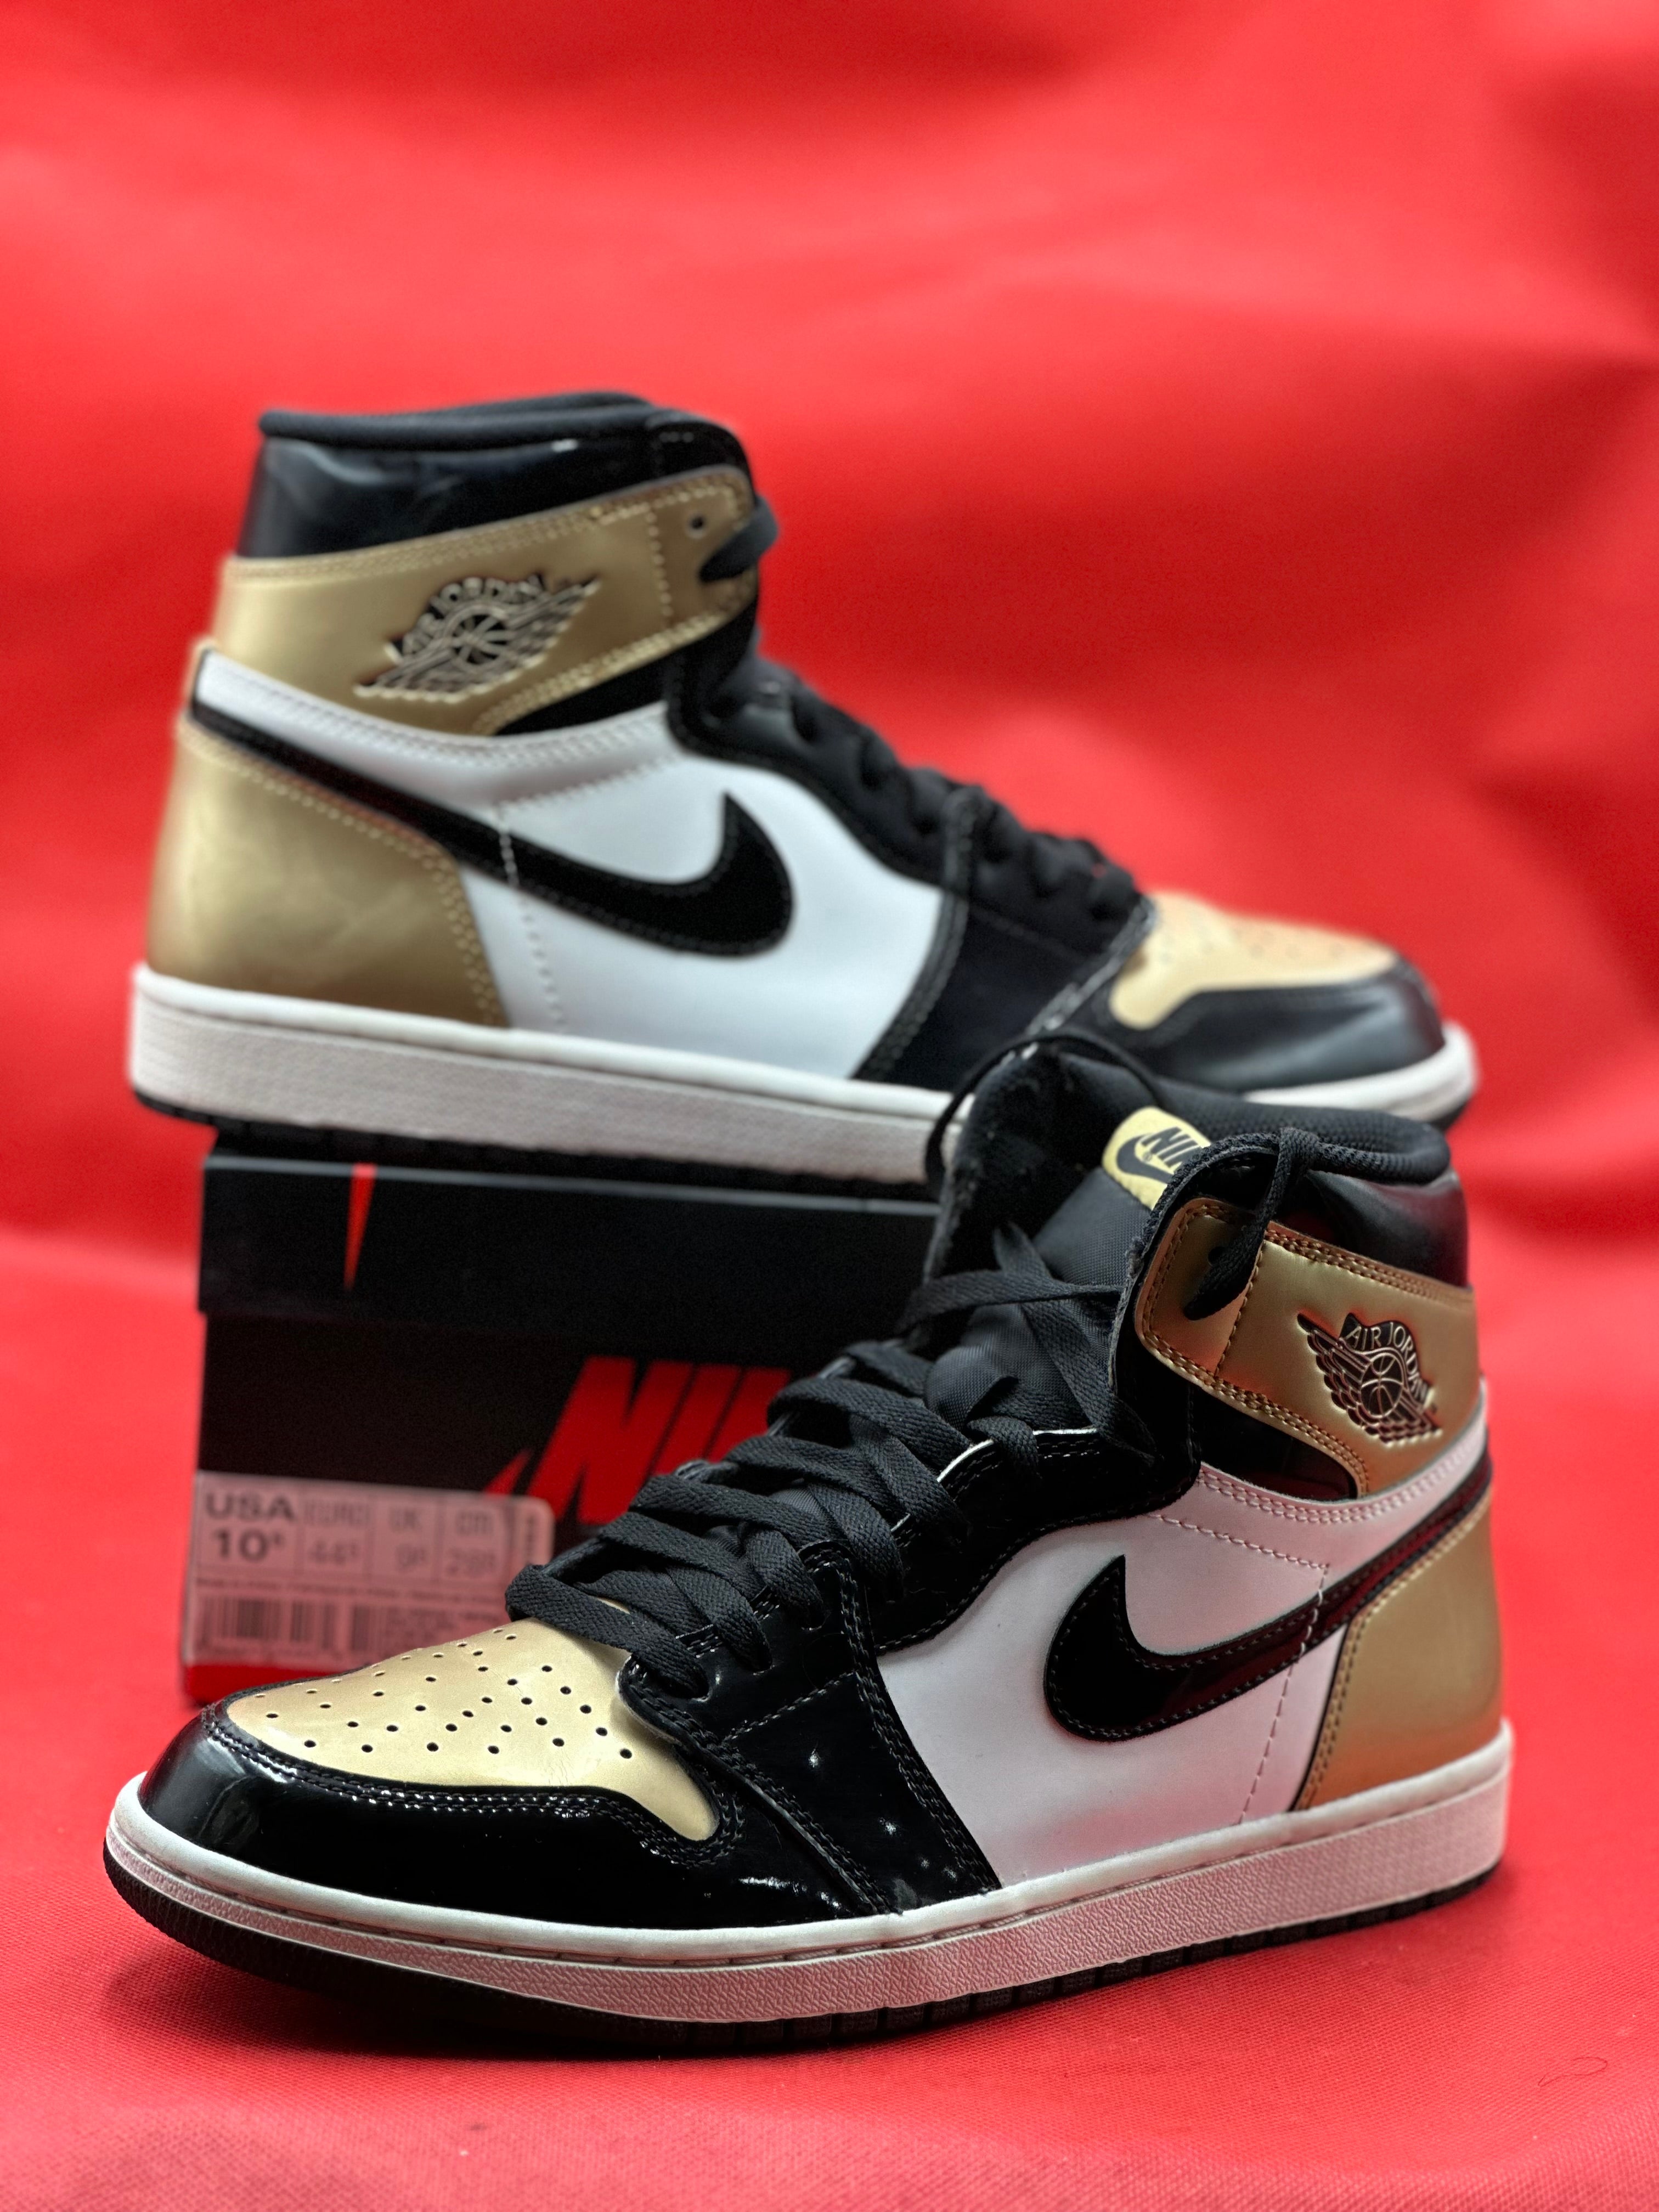 NRG Gold Toes 1s size 10.5